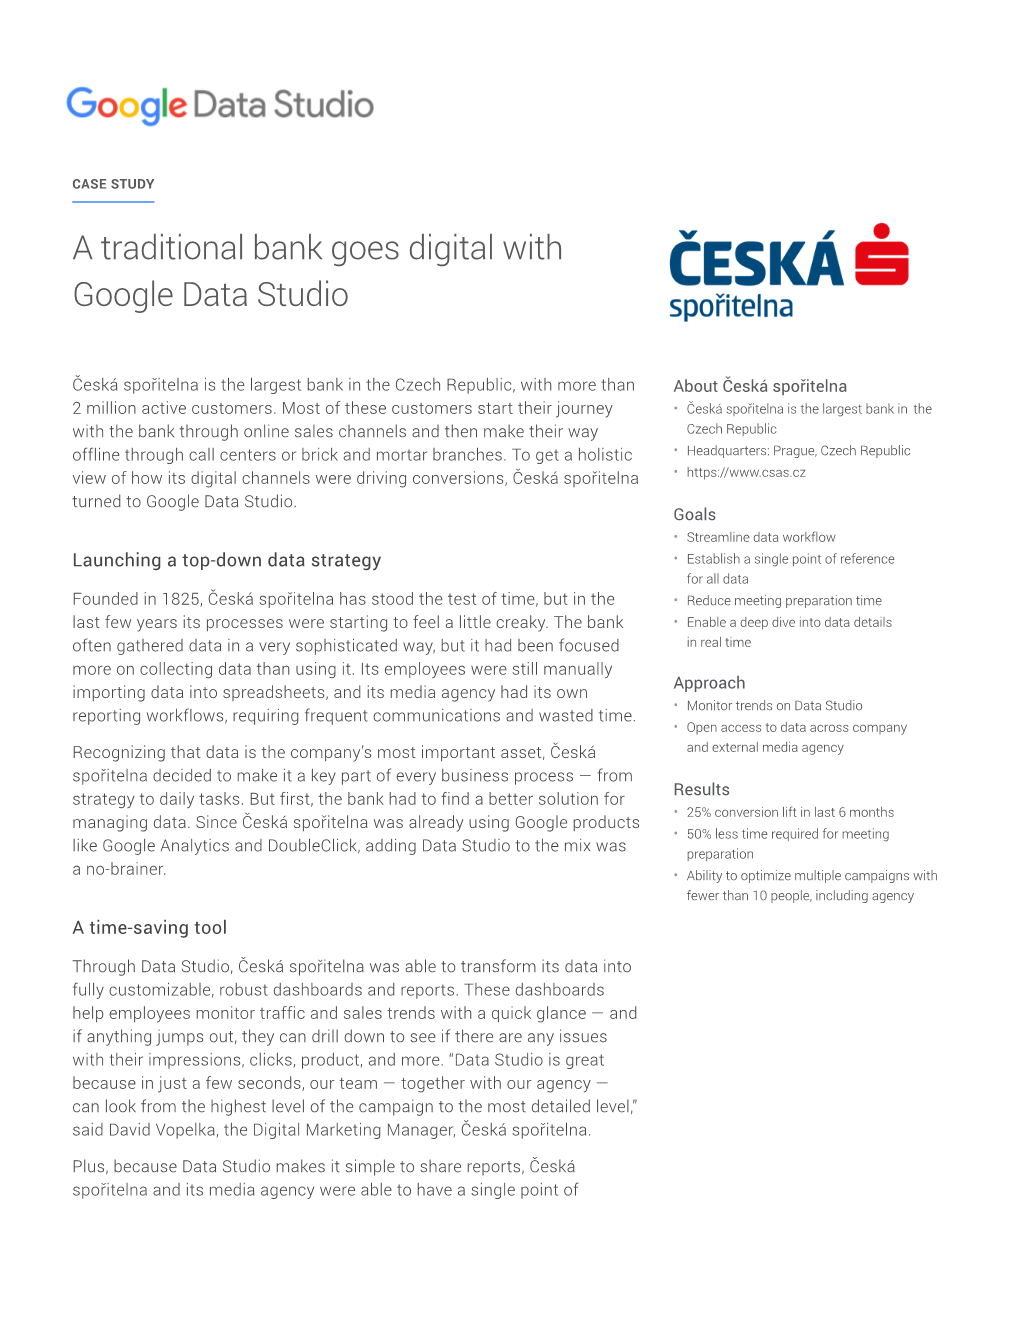 A Traditional Bank Goes Digital with Google Data Studio